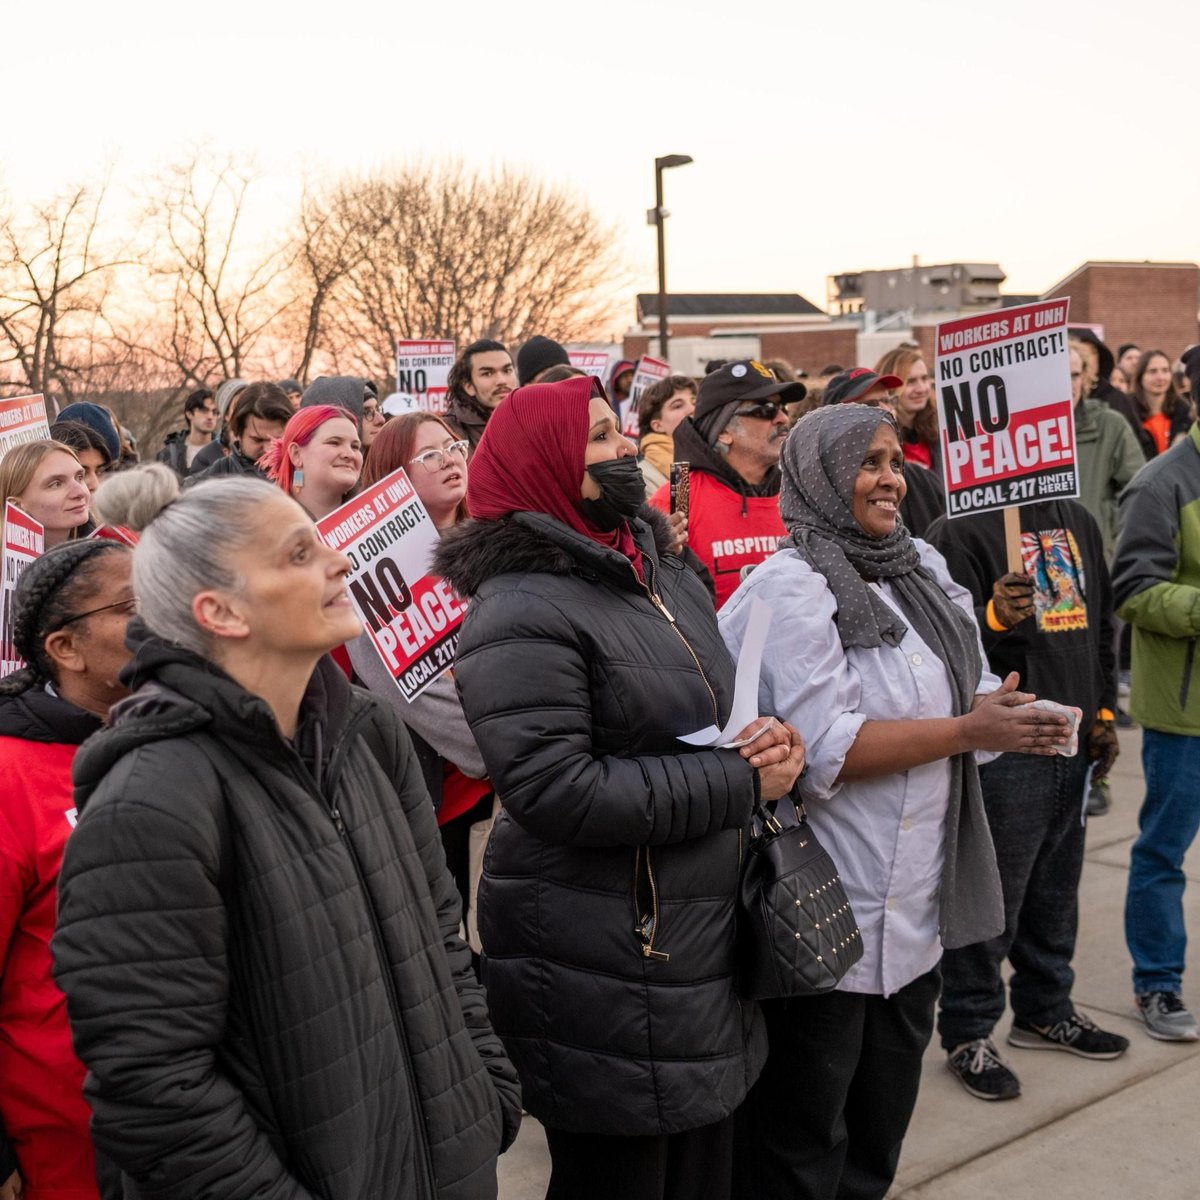 Yesterday, hundreds of University of New Haven workers and other members of Local 217 UNITE HERE joined together to demand UNH settle a fair contract NOW. UNH facilities workers deserve fair wages, affordable healthcare, and a safe workplace! And if we don't get it? SHUT IT DOWN.